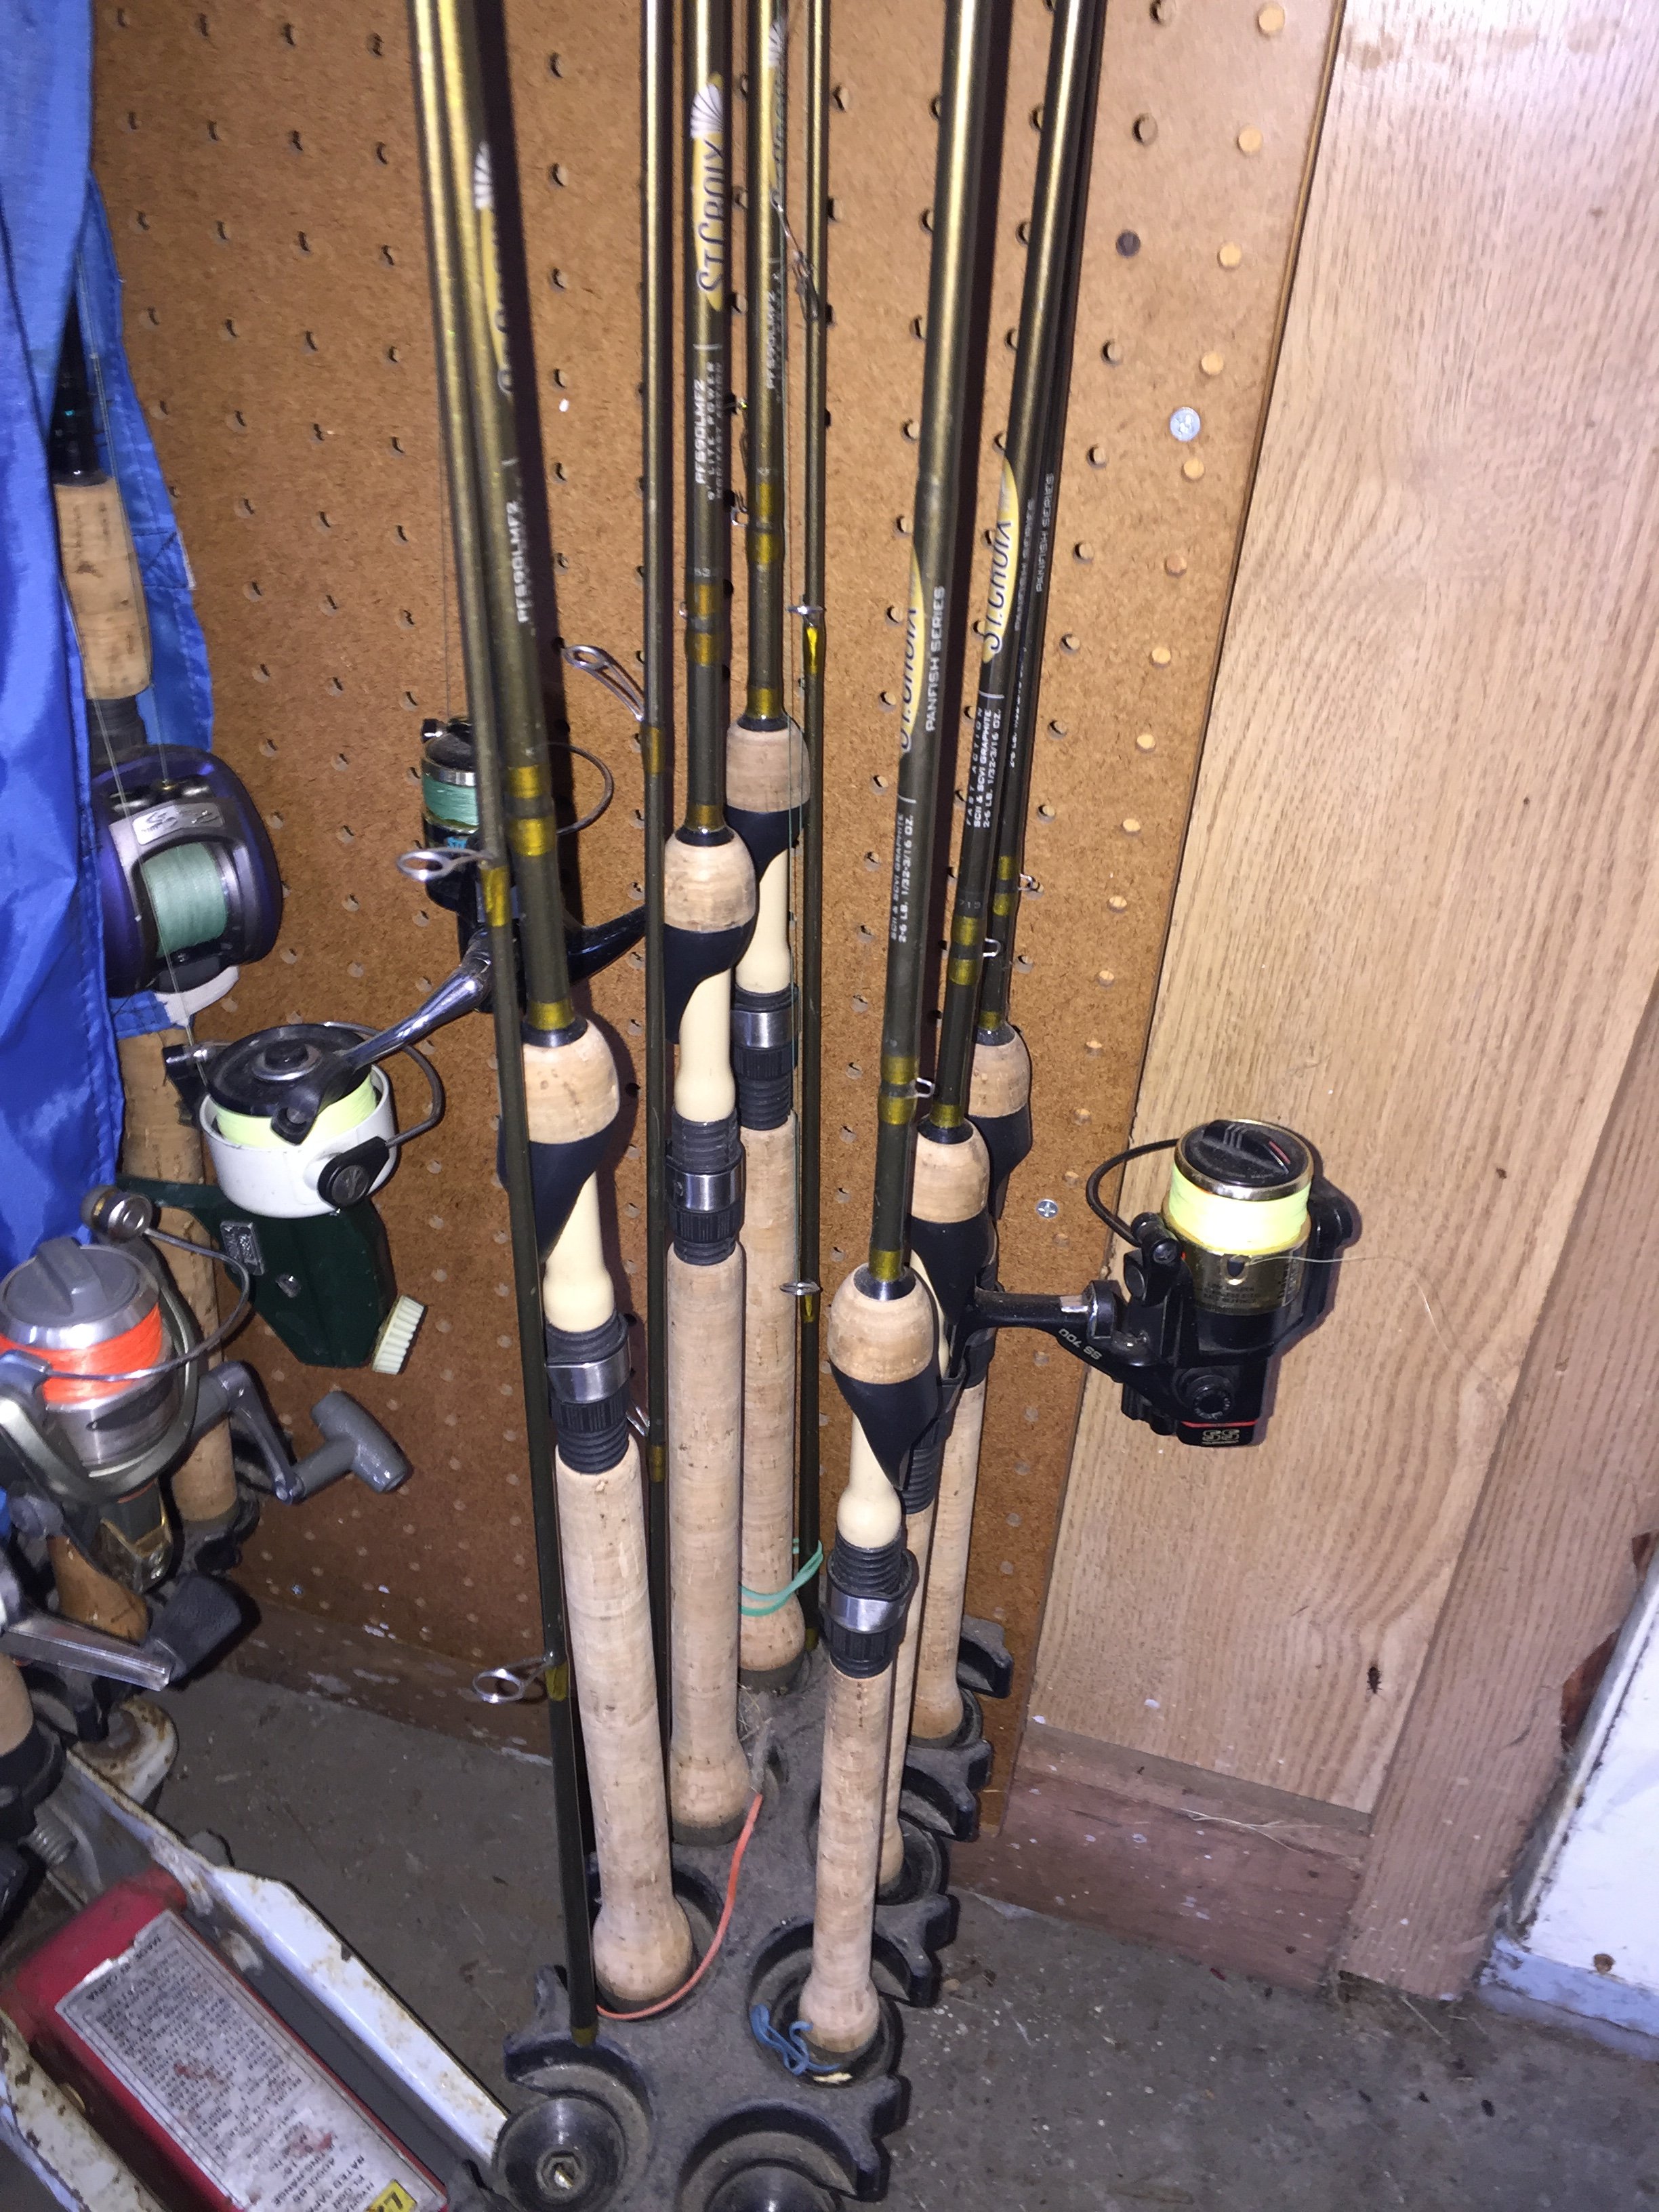 3 St. Croix Panfish Series Rods 6'9 - Classified Ads - Classified Ads